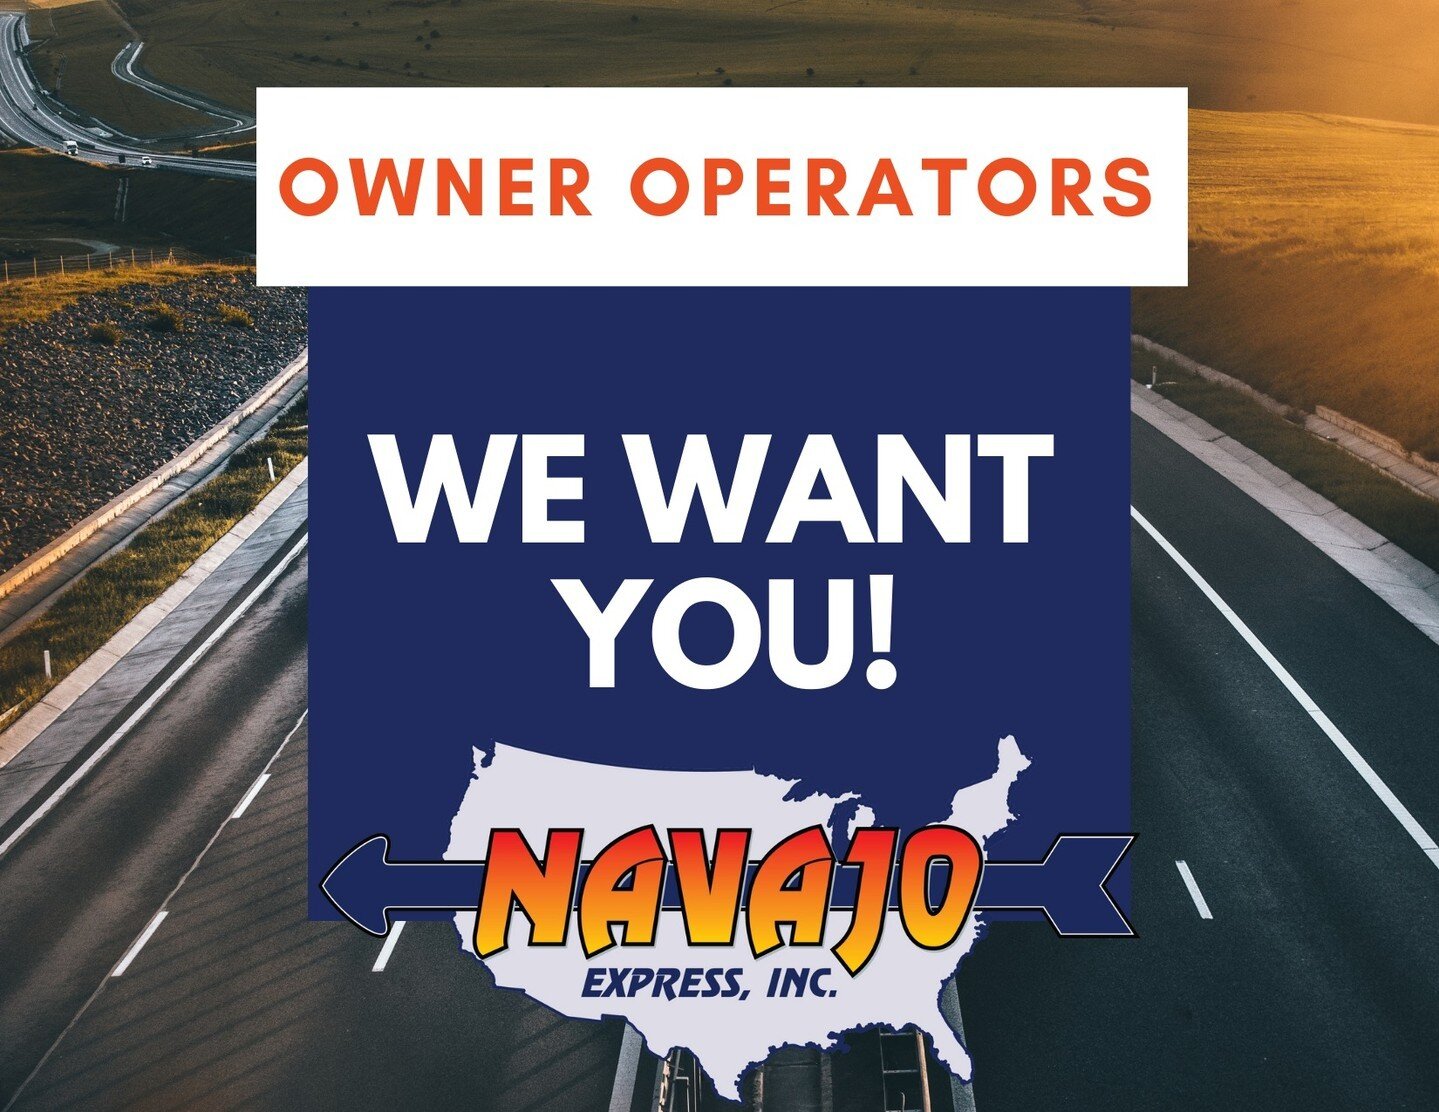 Owner-operators can count on outstanding support, consistent freight, and reliable pay. Let us help you grow your business, we're 100% committed to providing a positive driver experience.
Give us a call today. 800-245-9292

#NavajoExpressInc #Denver 